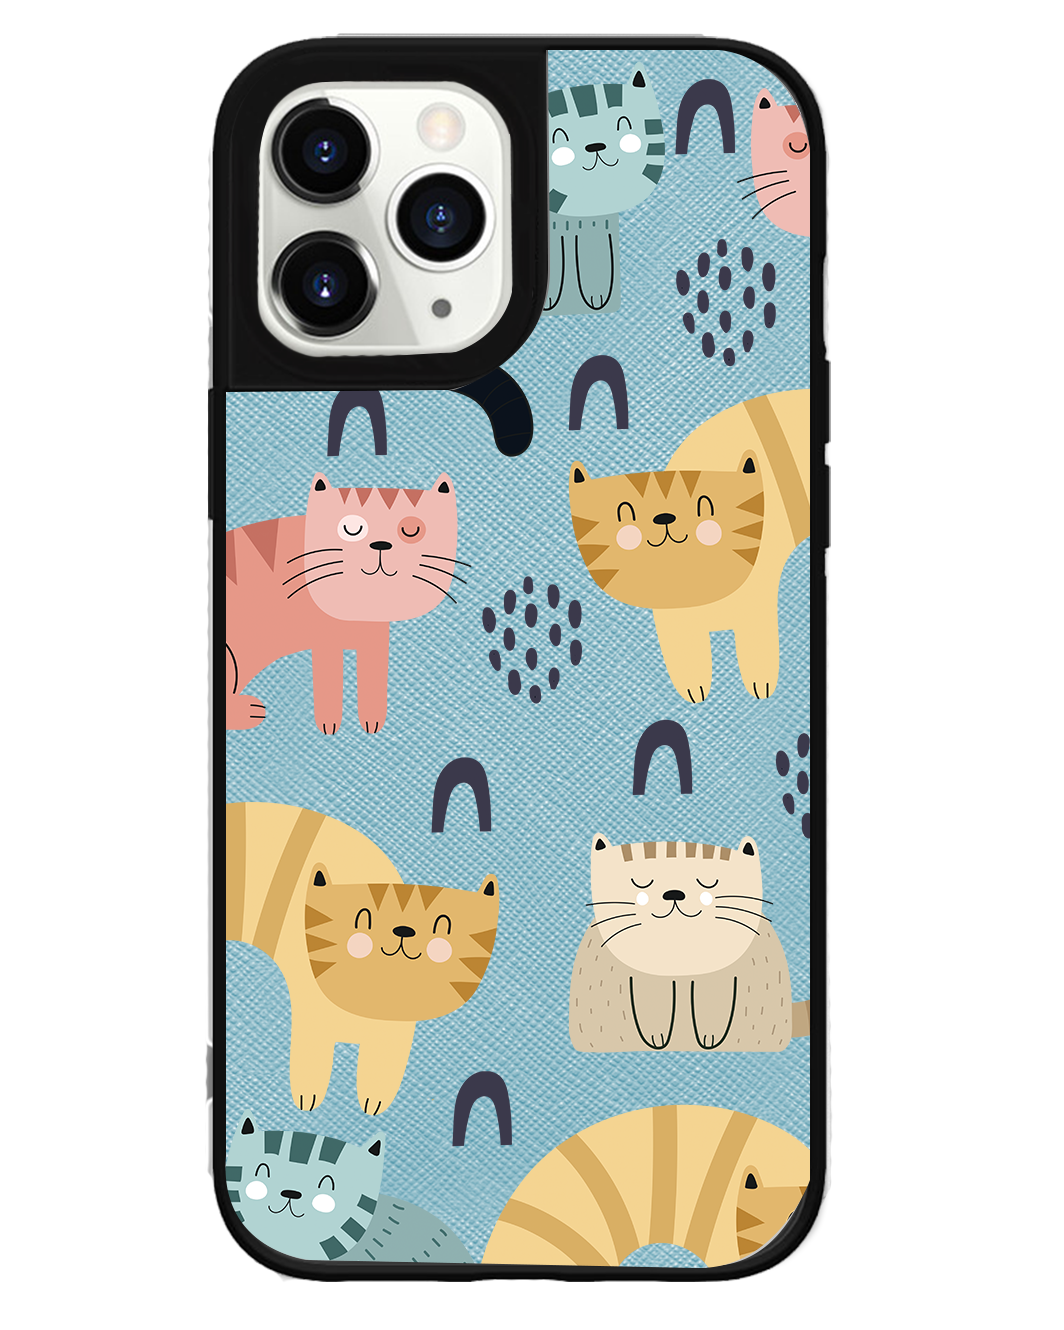 iPhone Leather Grip Case - Rainbow Meow 1.0